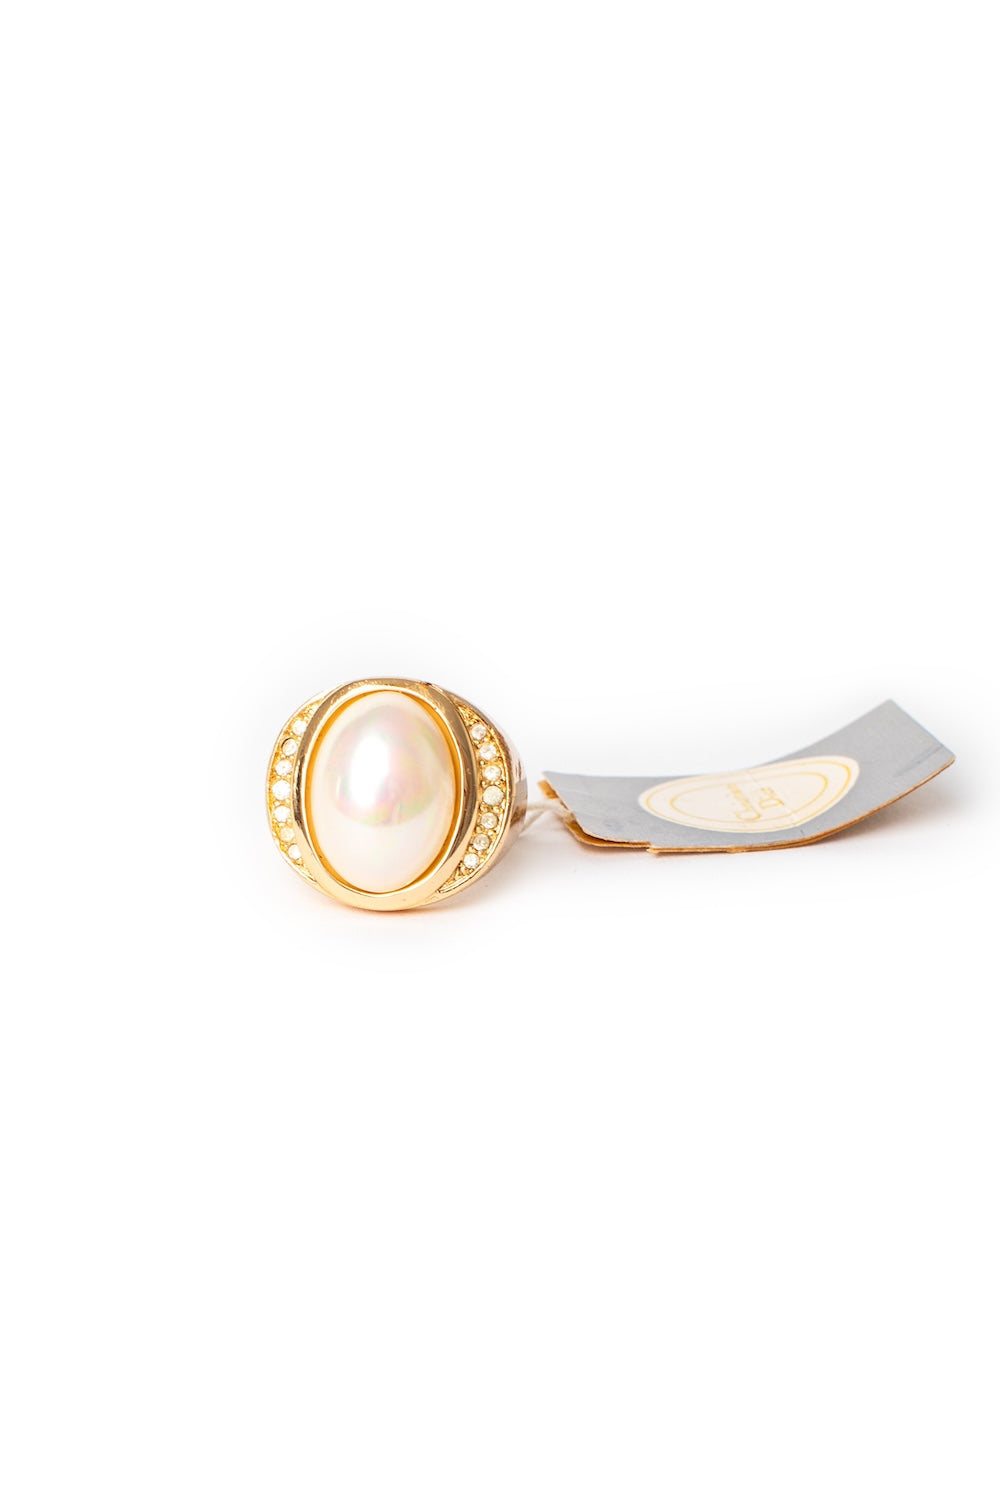 Christian Dior <br> 80's faux pearl & crystal gold cocktail ring